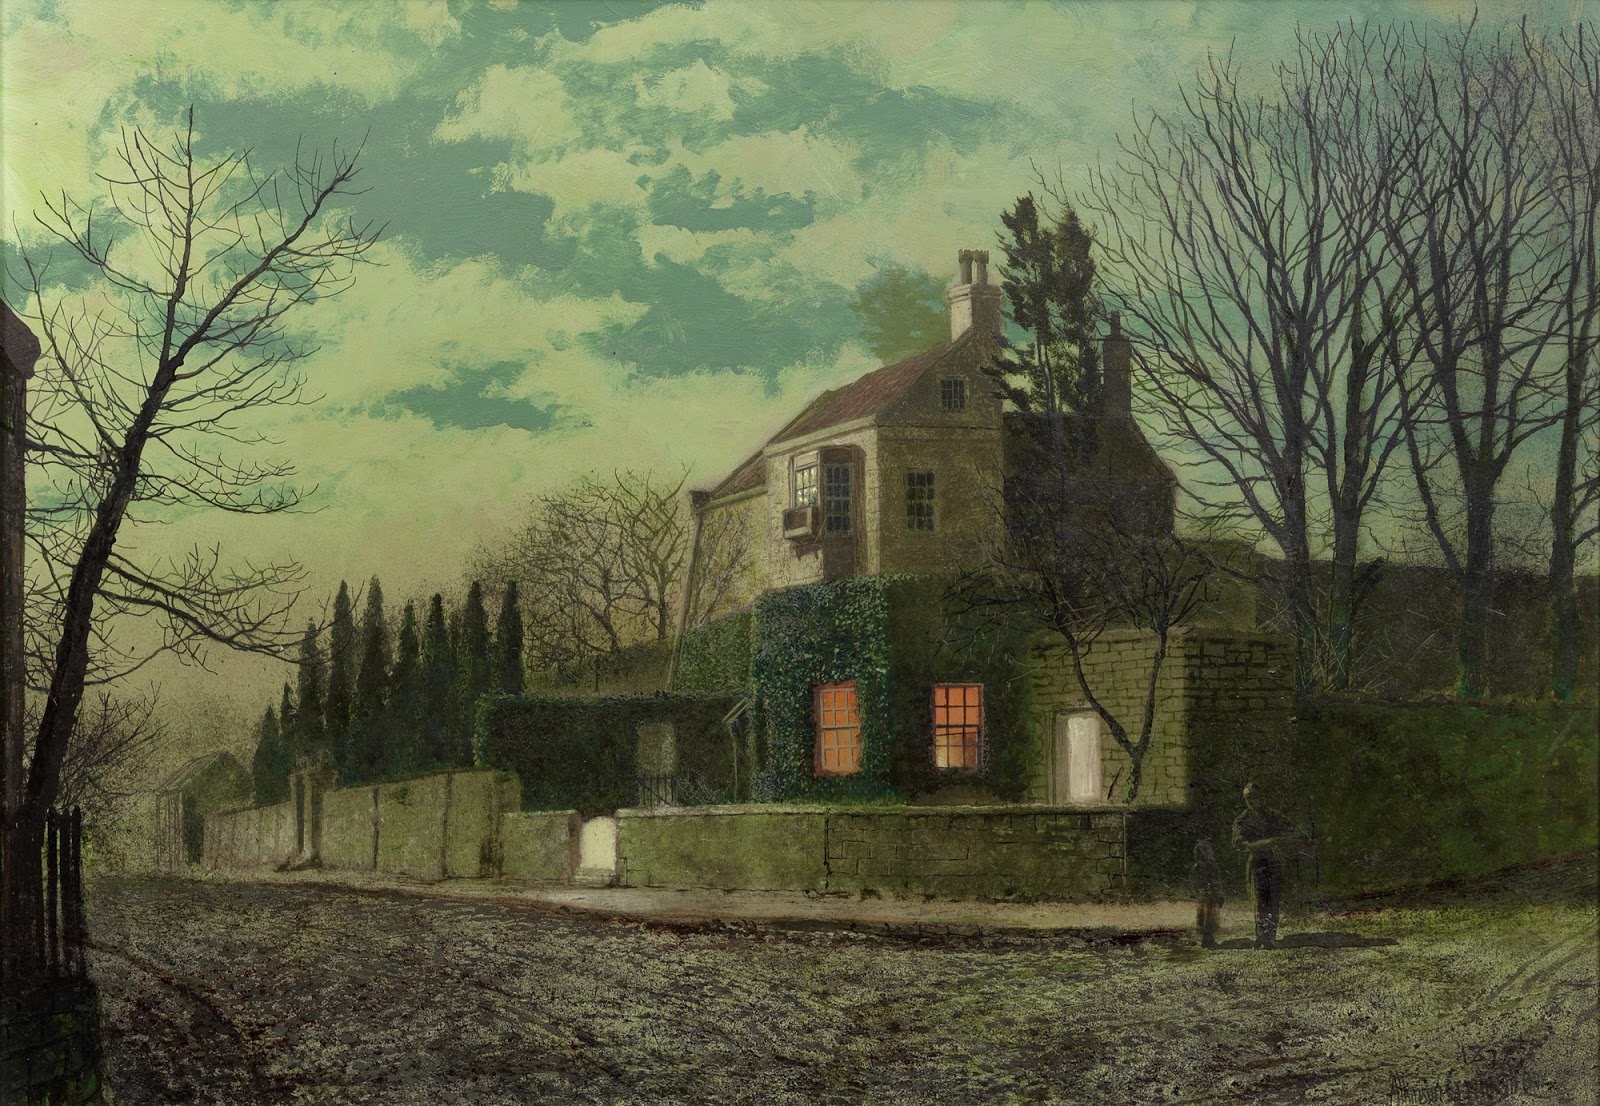 Yew Court, Scalby by Twilight 1877 by John Atkinson Grimshaw